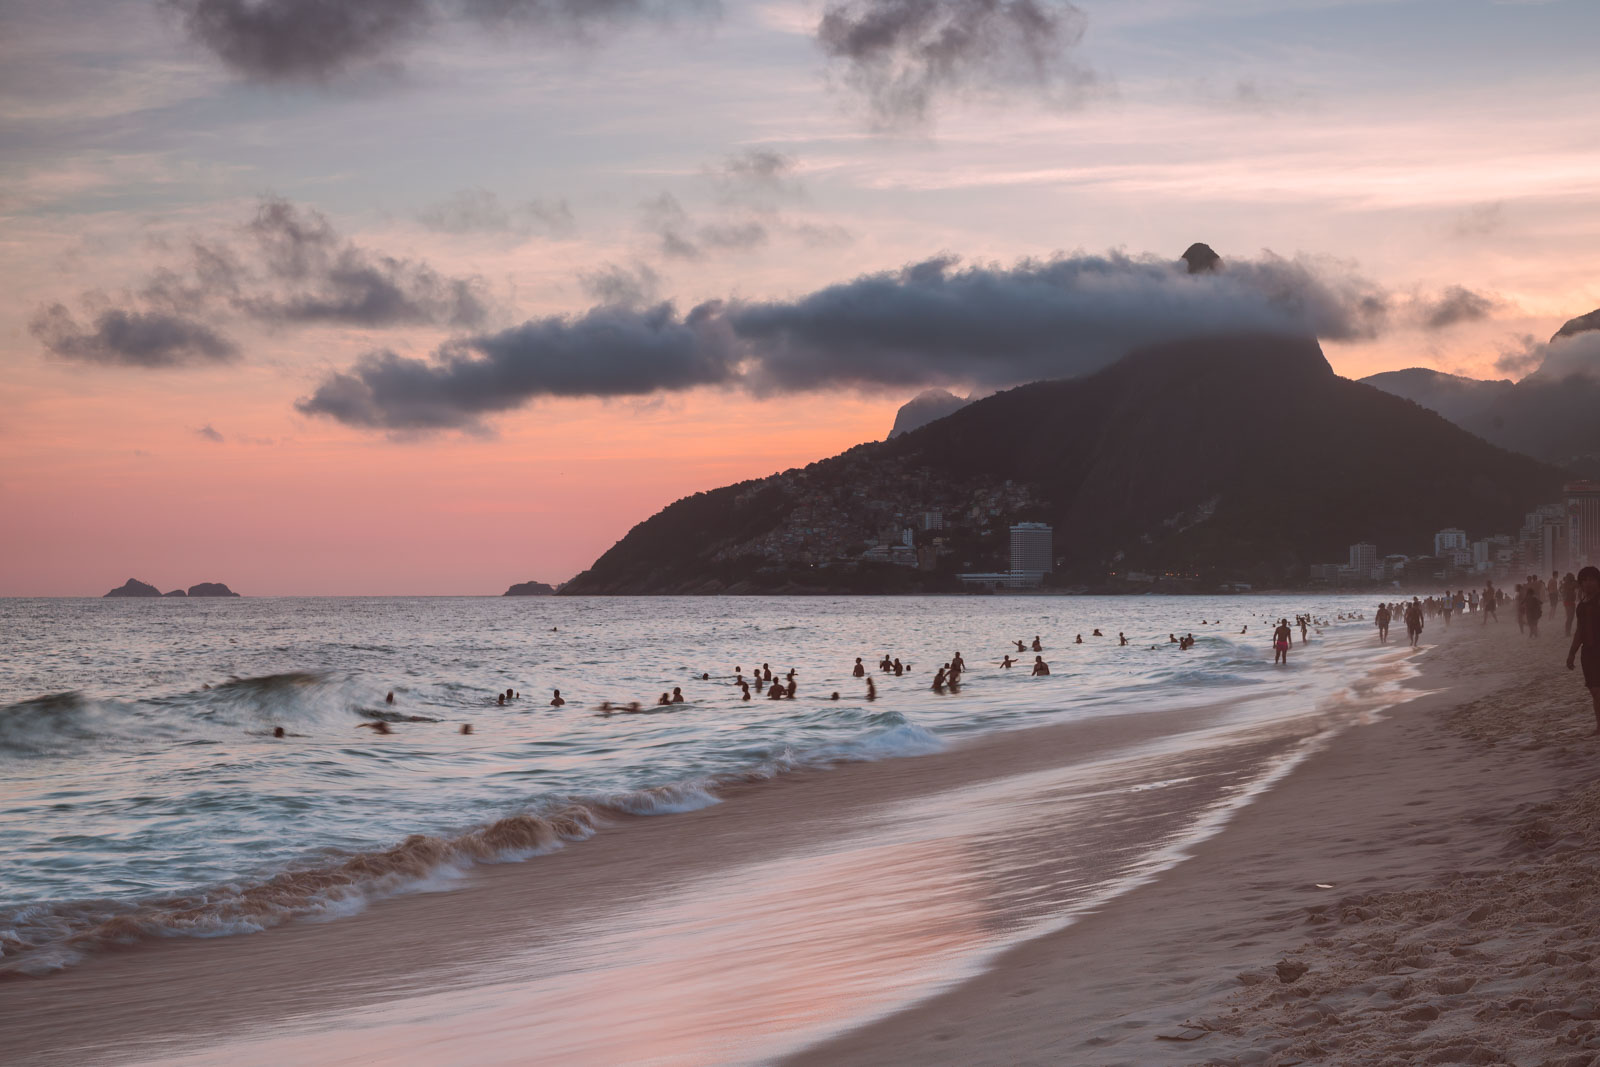 10 of the best hotels in Rio de Janeiro, from party houses to